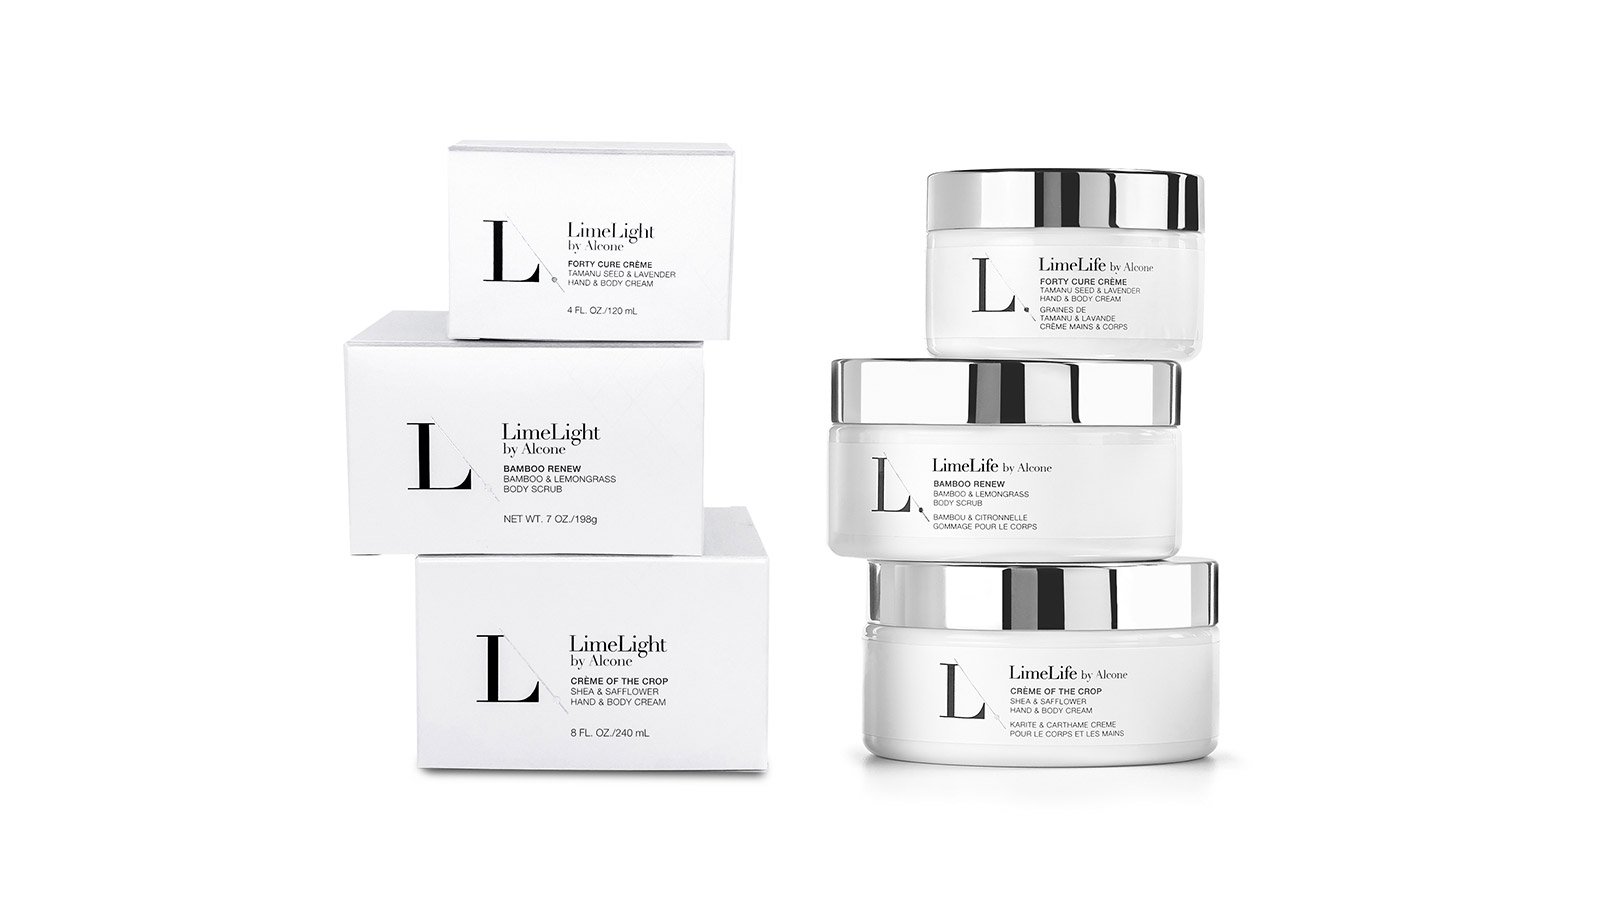 LimeLight Health & Beauty Labels